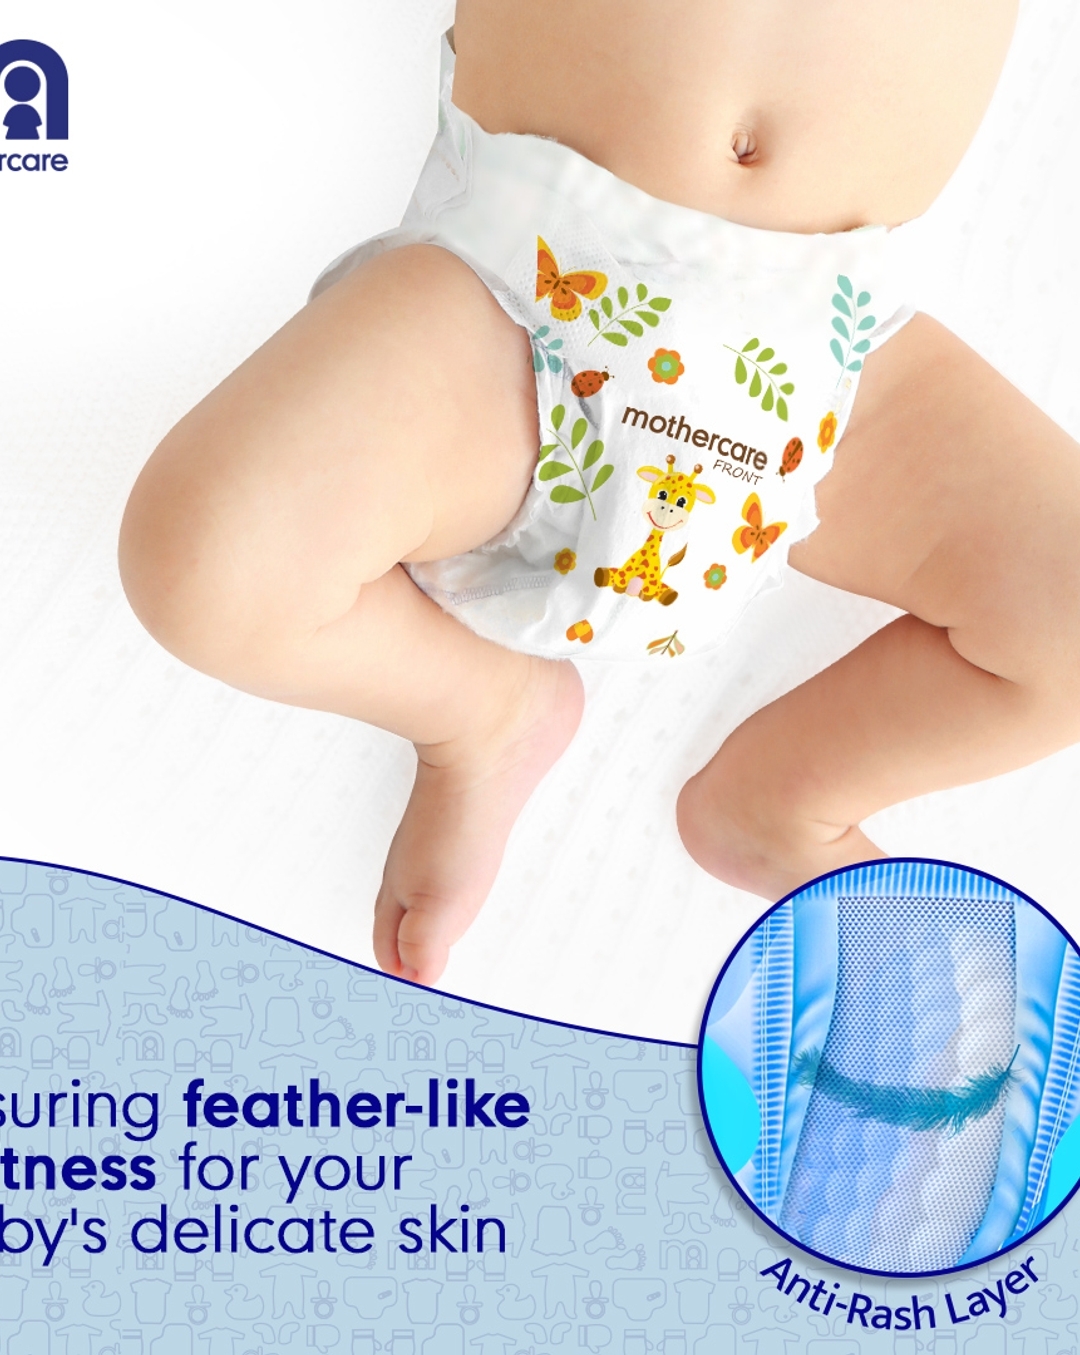 Buy Pampers Pants Diapers Medium Size 22 Pcs Online At Best Price of Rs 399   bigbasket